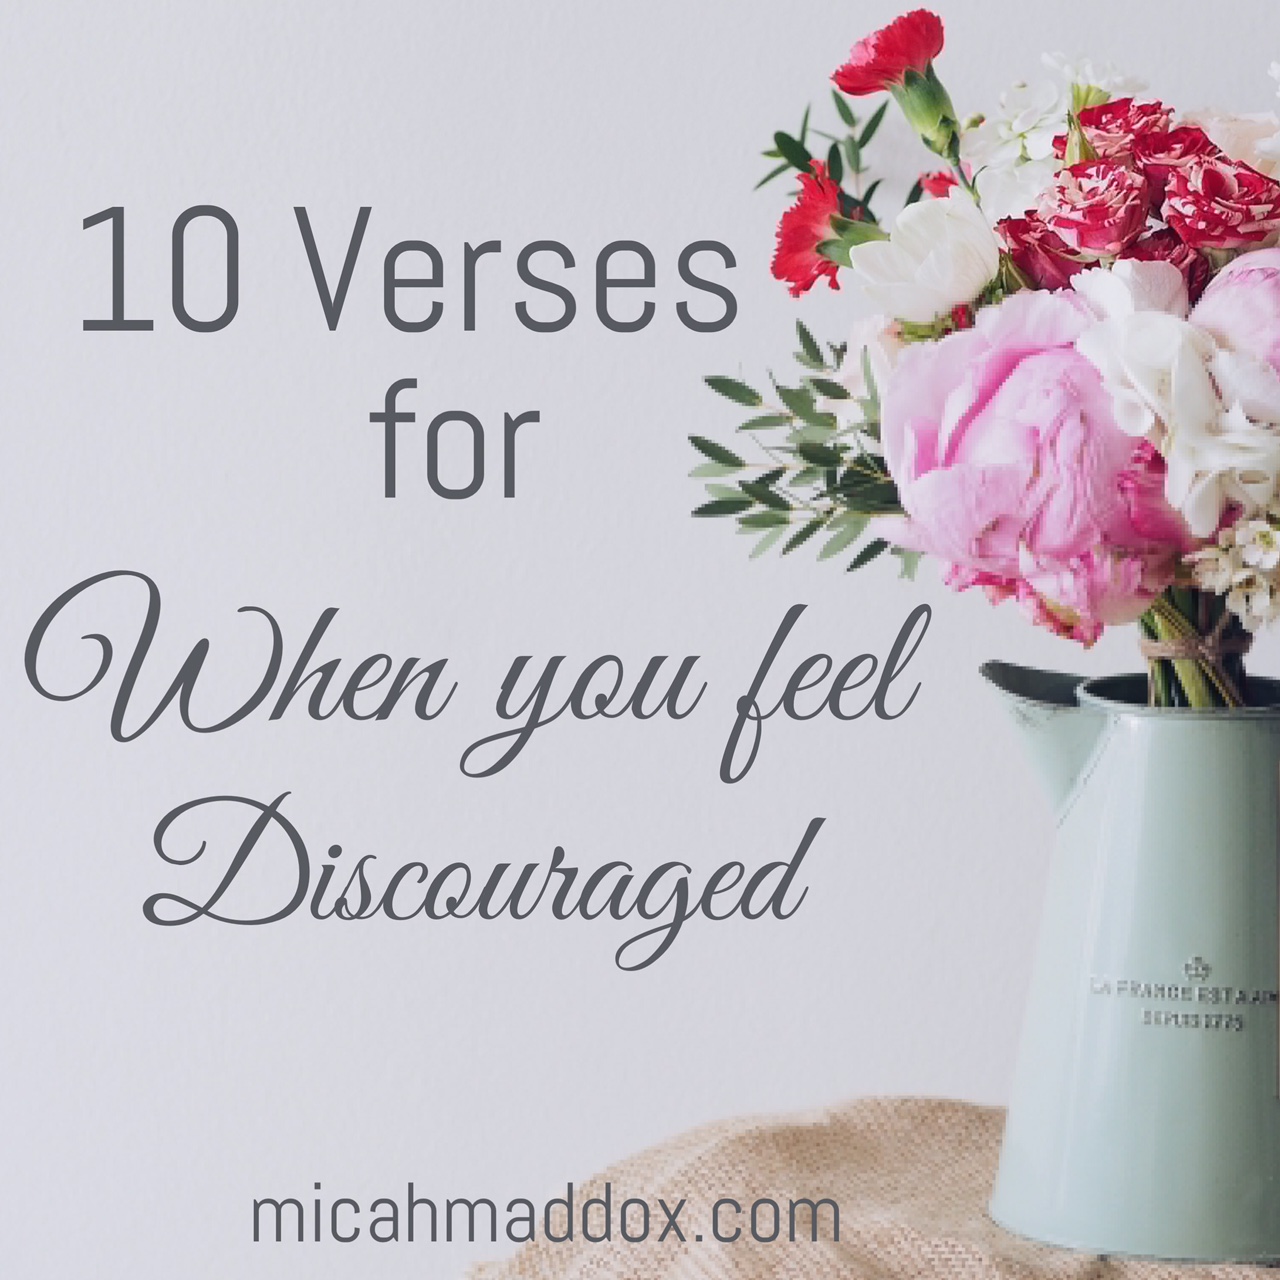 10 Verses for When You Feel Discouraged